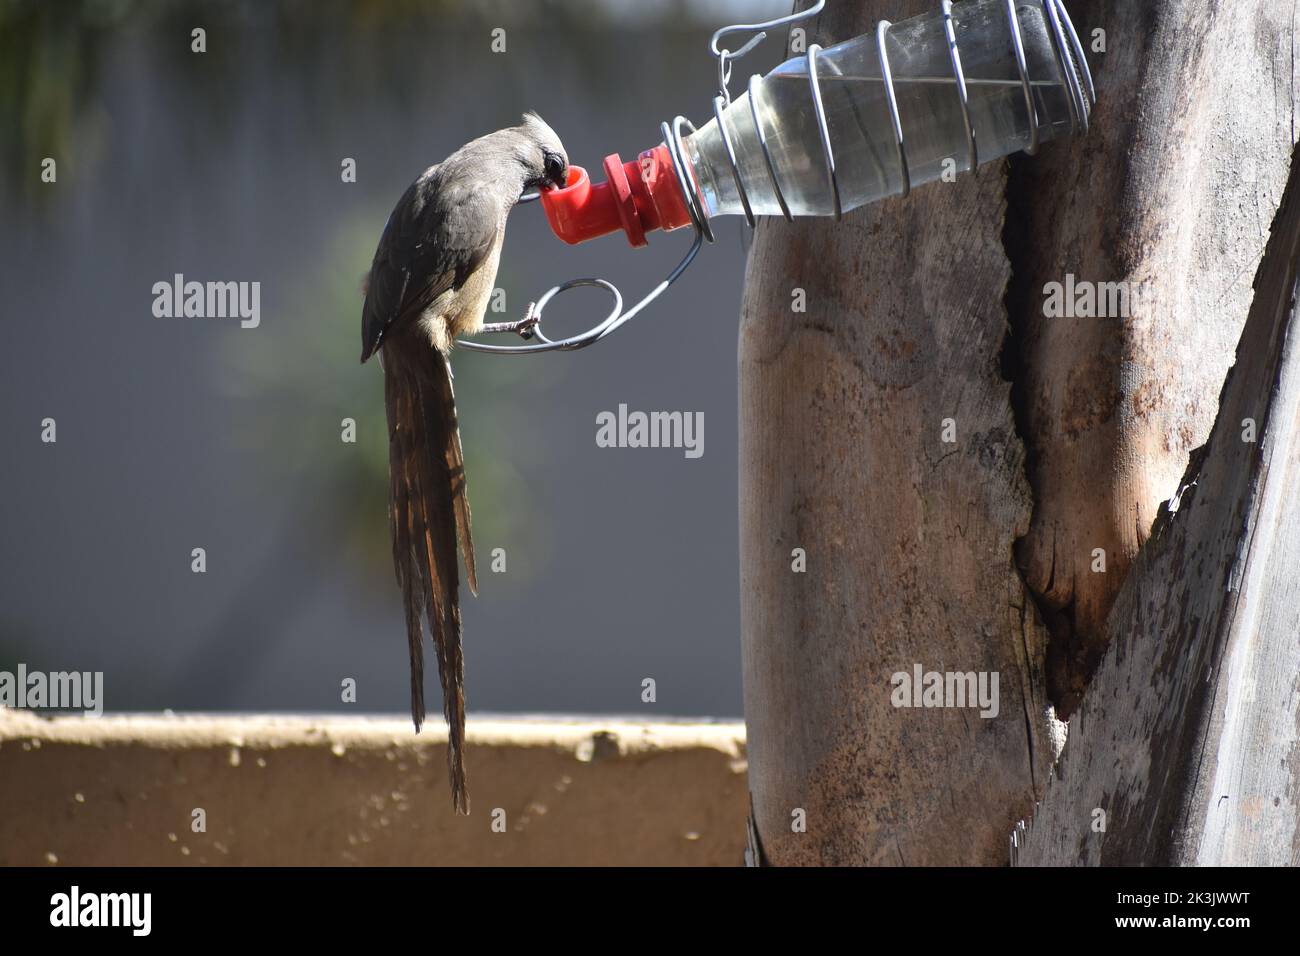 Speckled mousebird (Colius striatus) drinking sugar water(nectar) from a bird feeder in south africa. Part of Coliidae family. Coliiformes Stock Photo